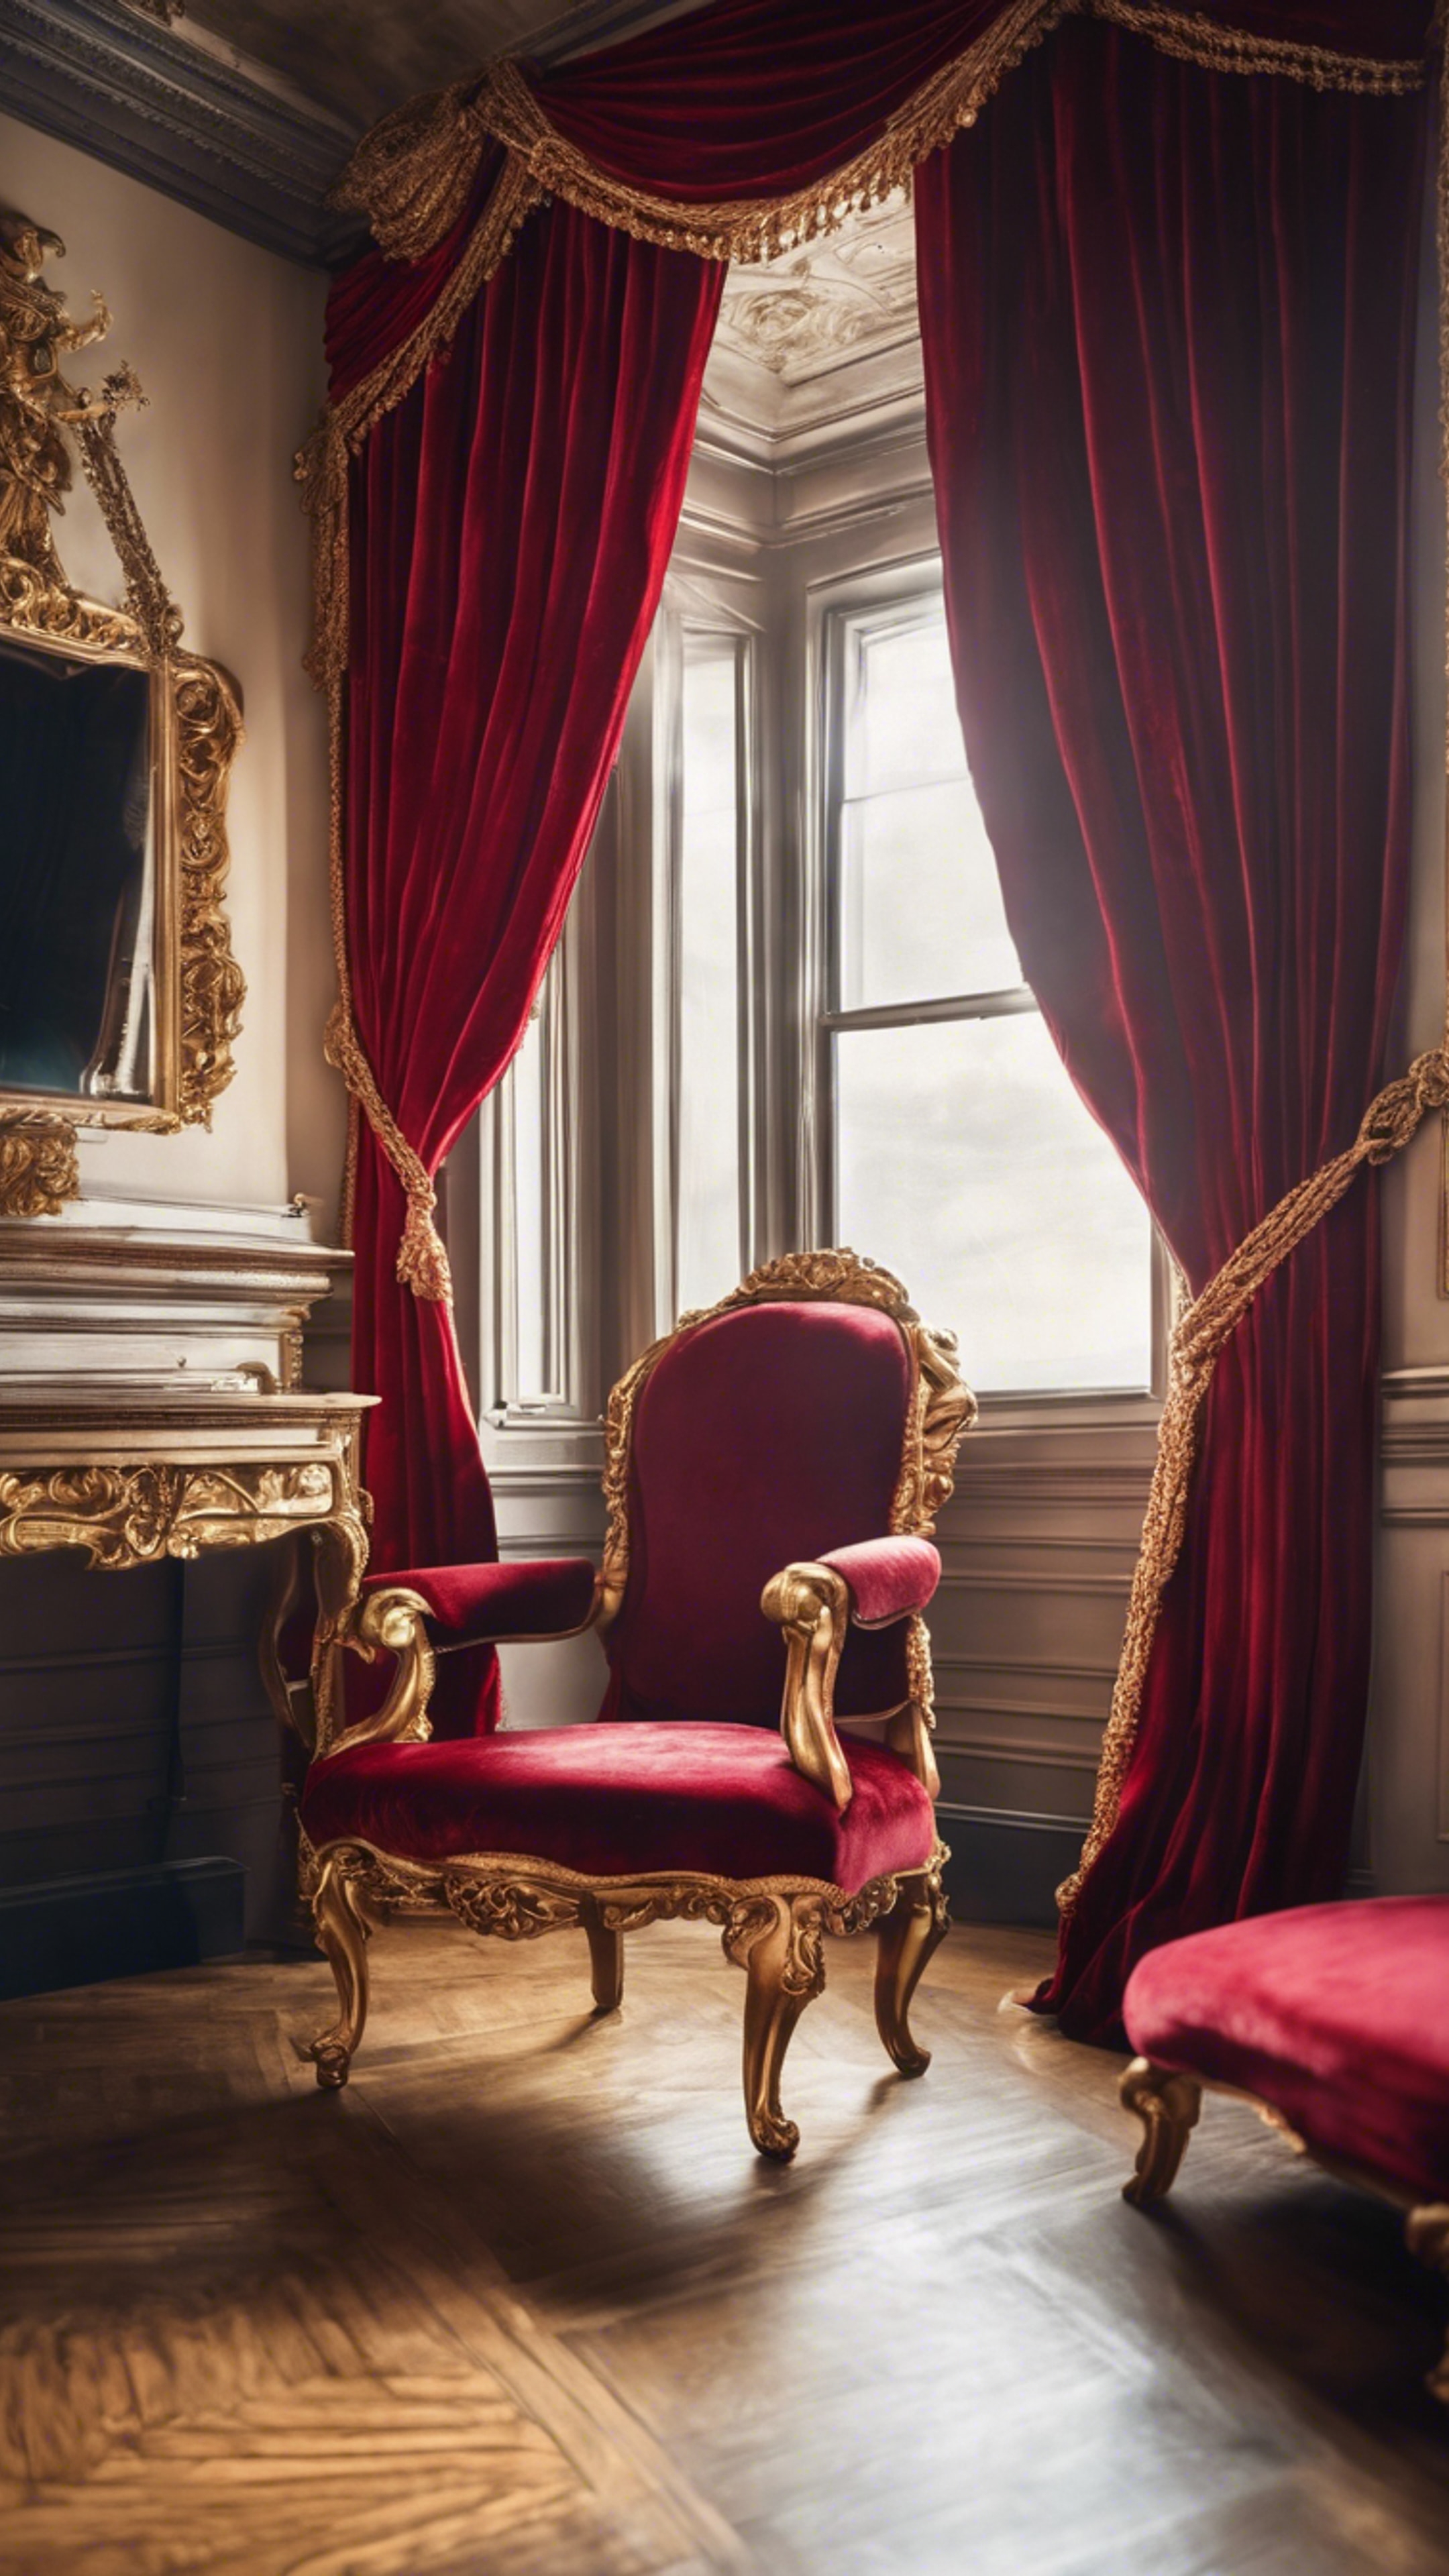 Red velvet drapes tied back with gold ropes in a grand victorian-style living room. ផ្ទាំង​រូបភាព[6c8dd2a9b4f74c0eb869]